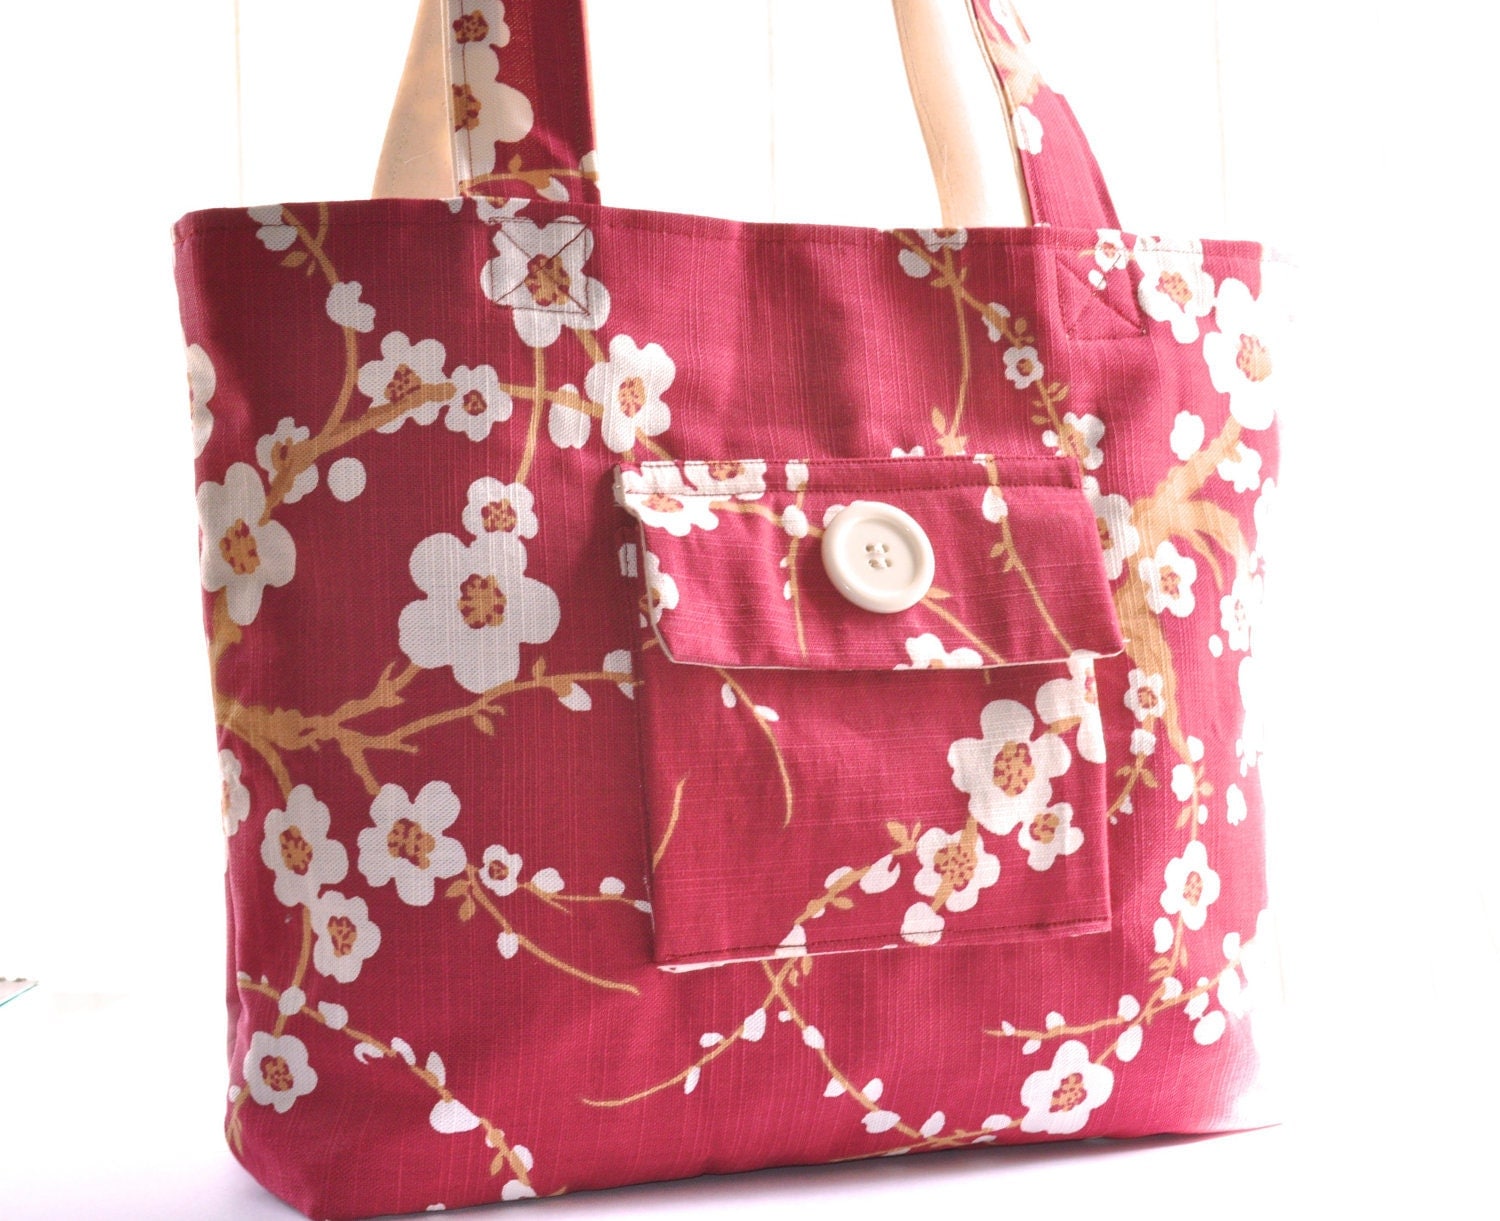 Laura Ashley tote bag purse cherry blossom floral print lined